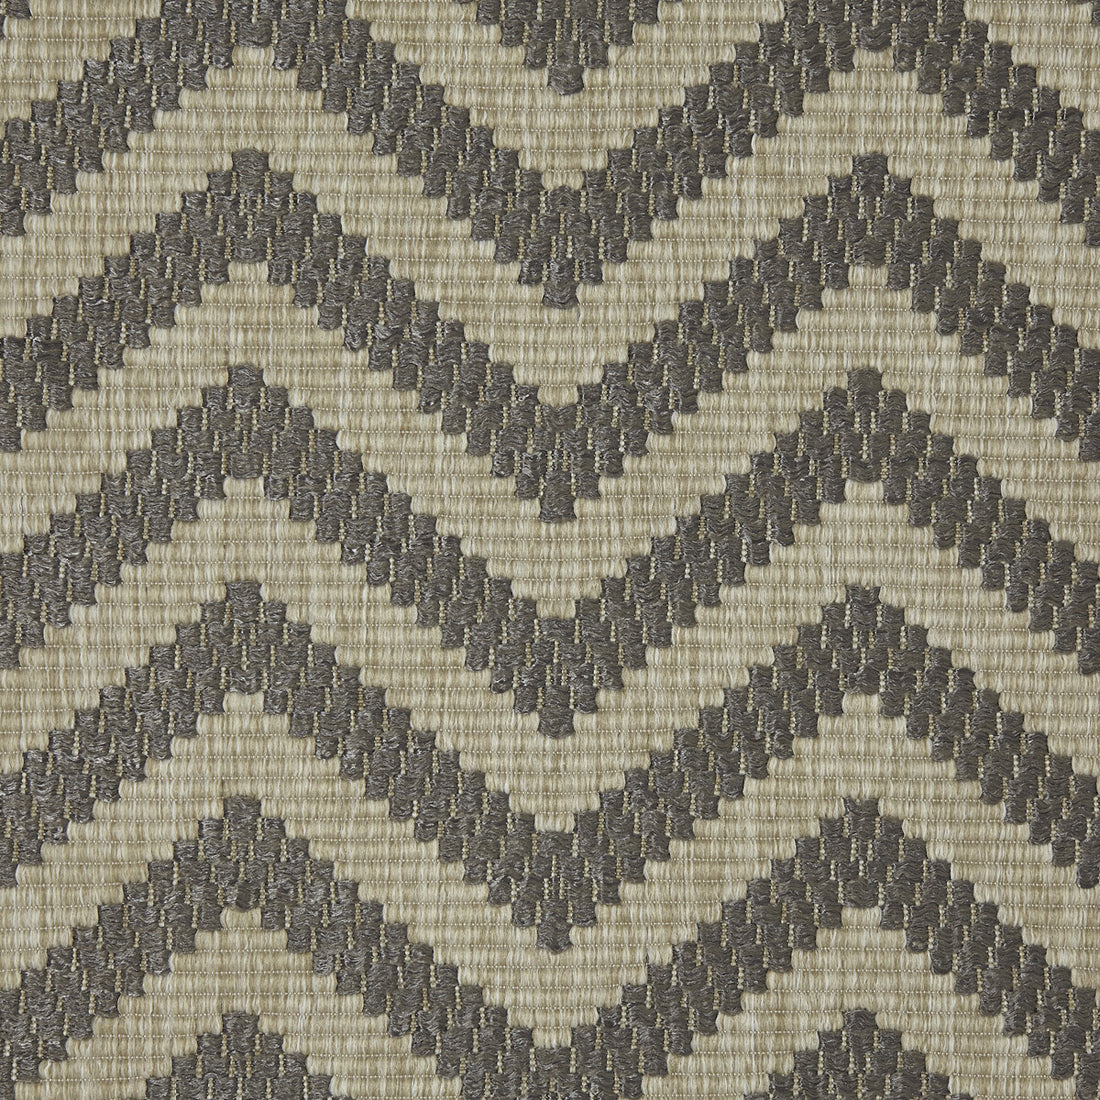 Marelle fabric in 9 color - pattern LZ-30347.09.0 - by Kravet Design in the Lizzo Indoor/Outdoor collection